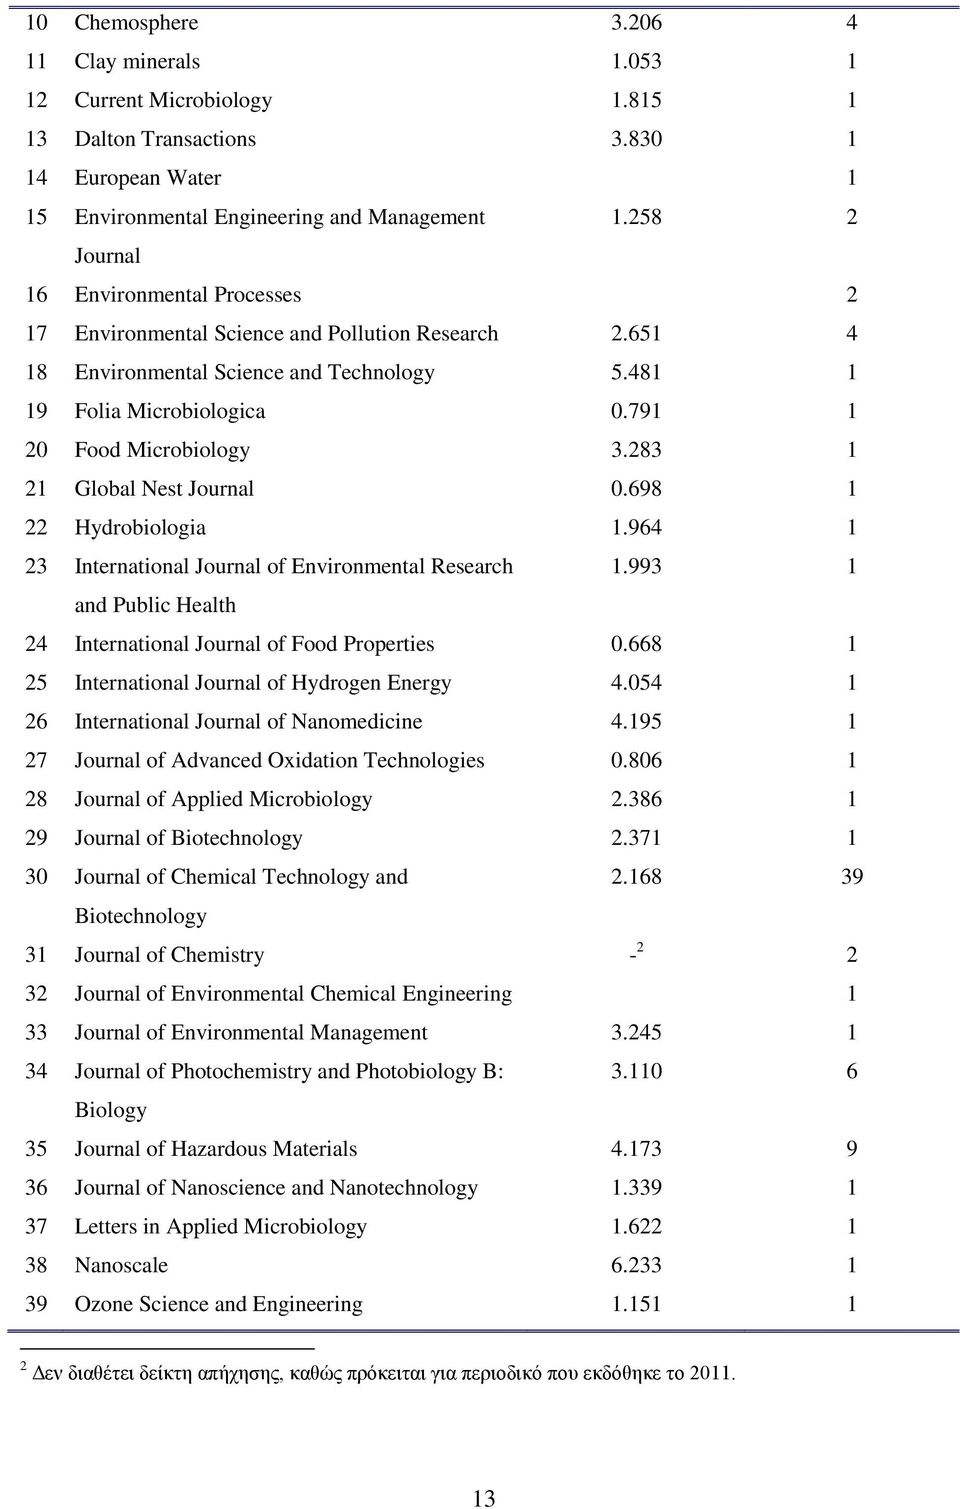 791 1 20 Food Microbiology 3.283 1 21 Global Nest Journal 0.698 1 22 Hydrobiologia 1.964 1 23 International Journal of Environmental Research 1.